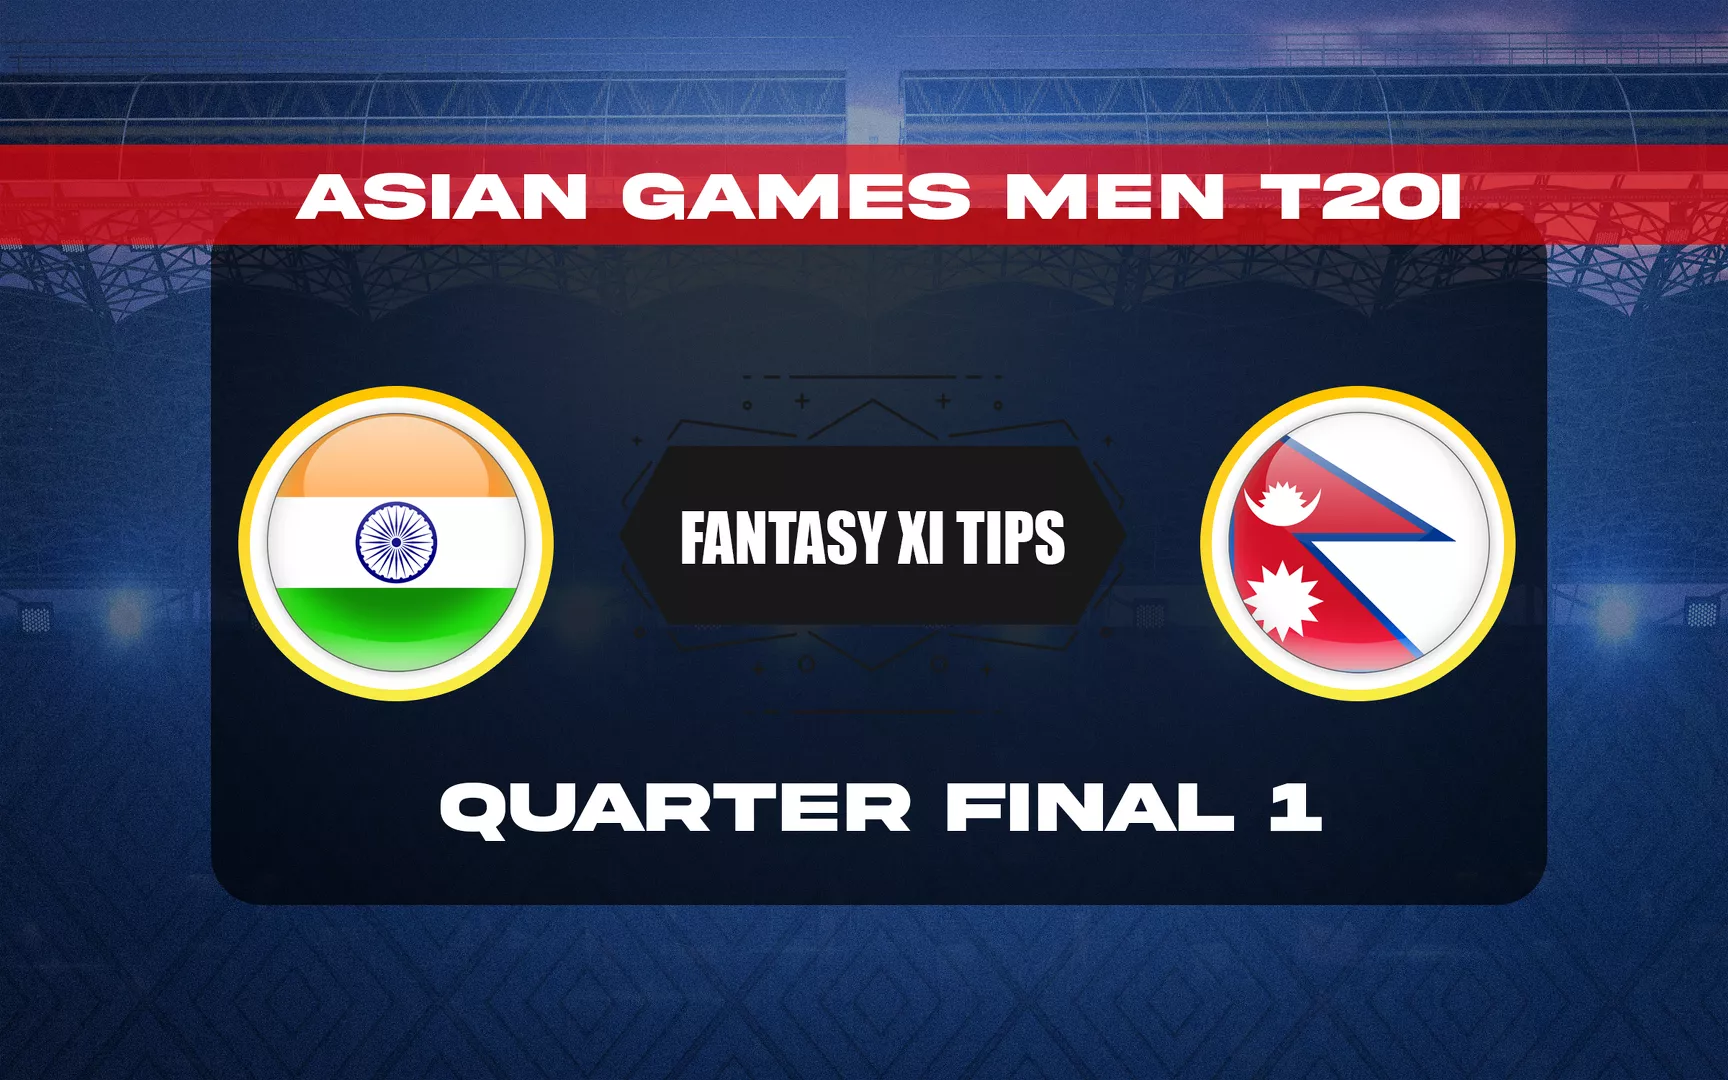 IND vs NEP Dream11 Prediction, Dream11 Playing XI, Today Quarter Final 1, Asian Games Men T20I